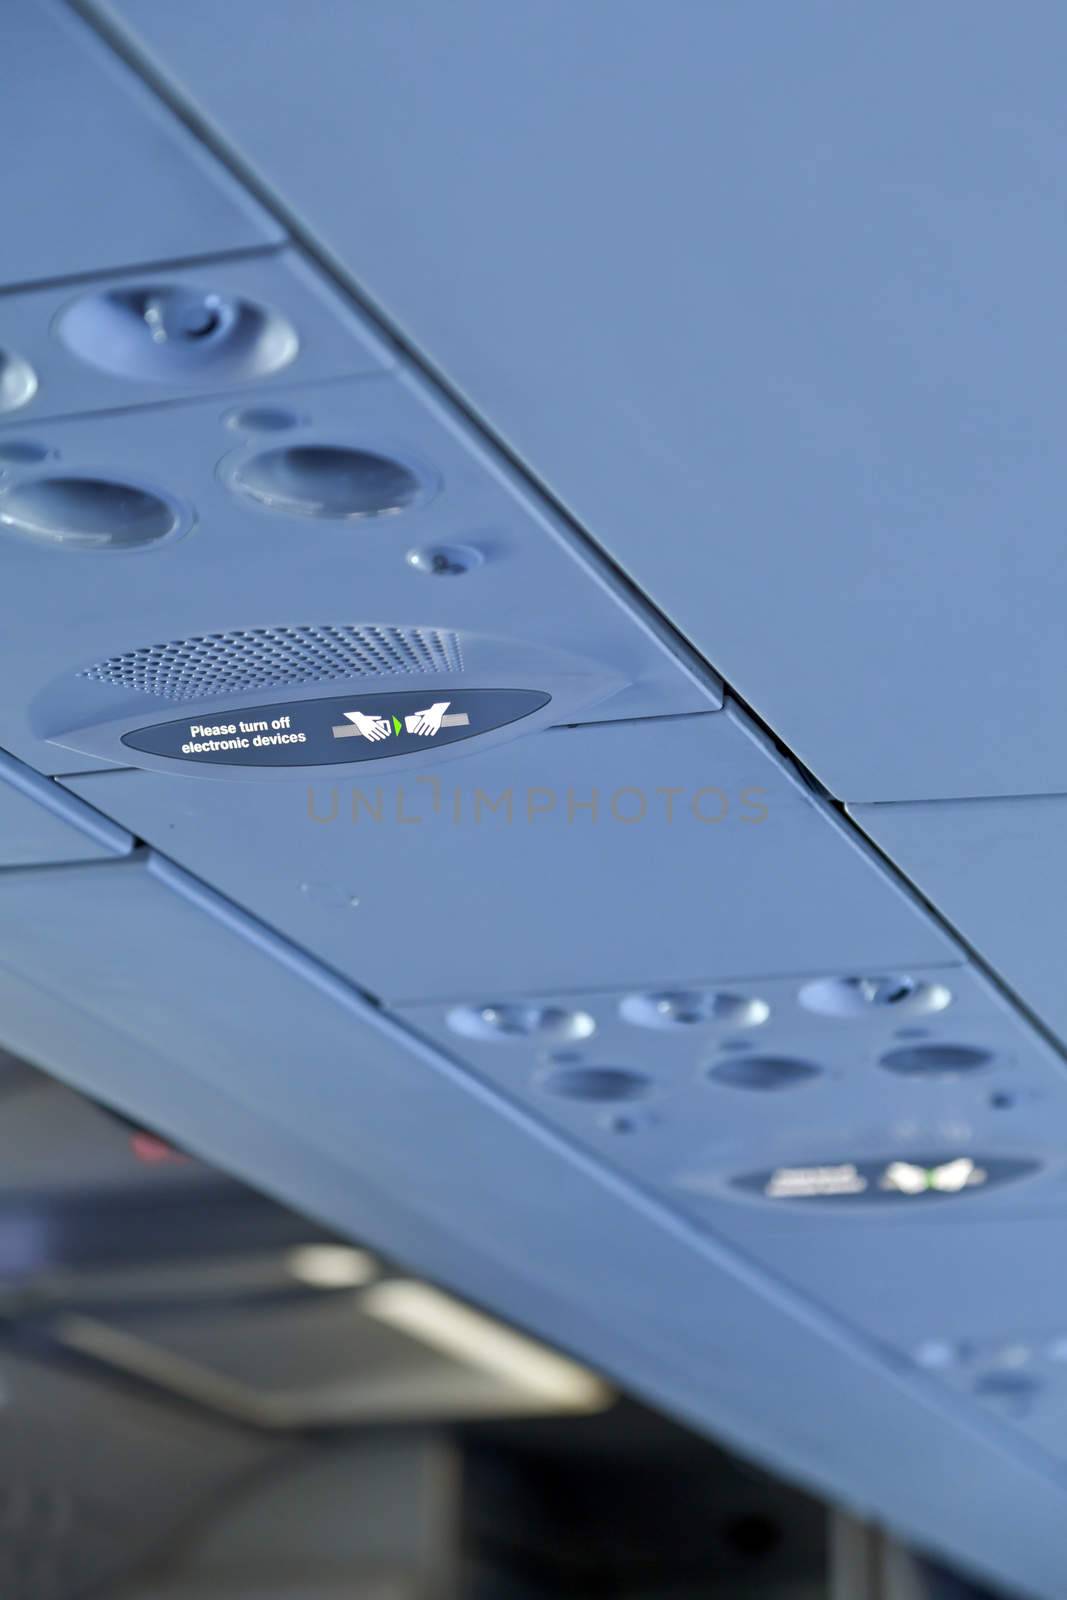 vertical color portrait captured in a passenger airline somewhere in europe shot passenger cabin ceiling and advisory lights for fasten seat belts and switch off electronic equipment and devices such as mobile phones